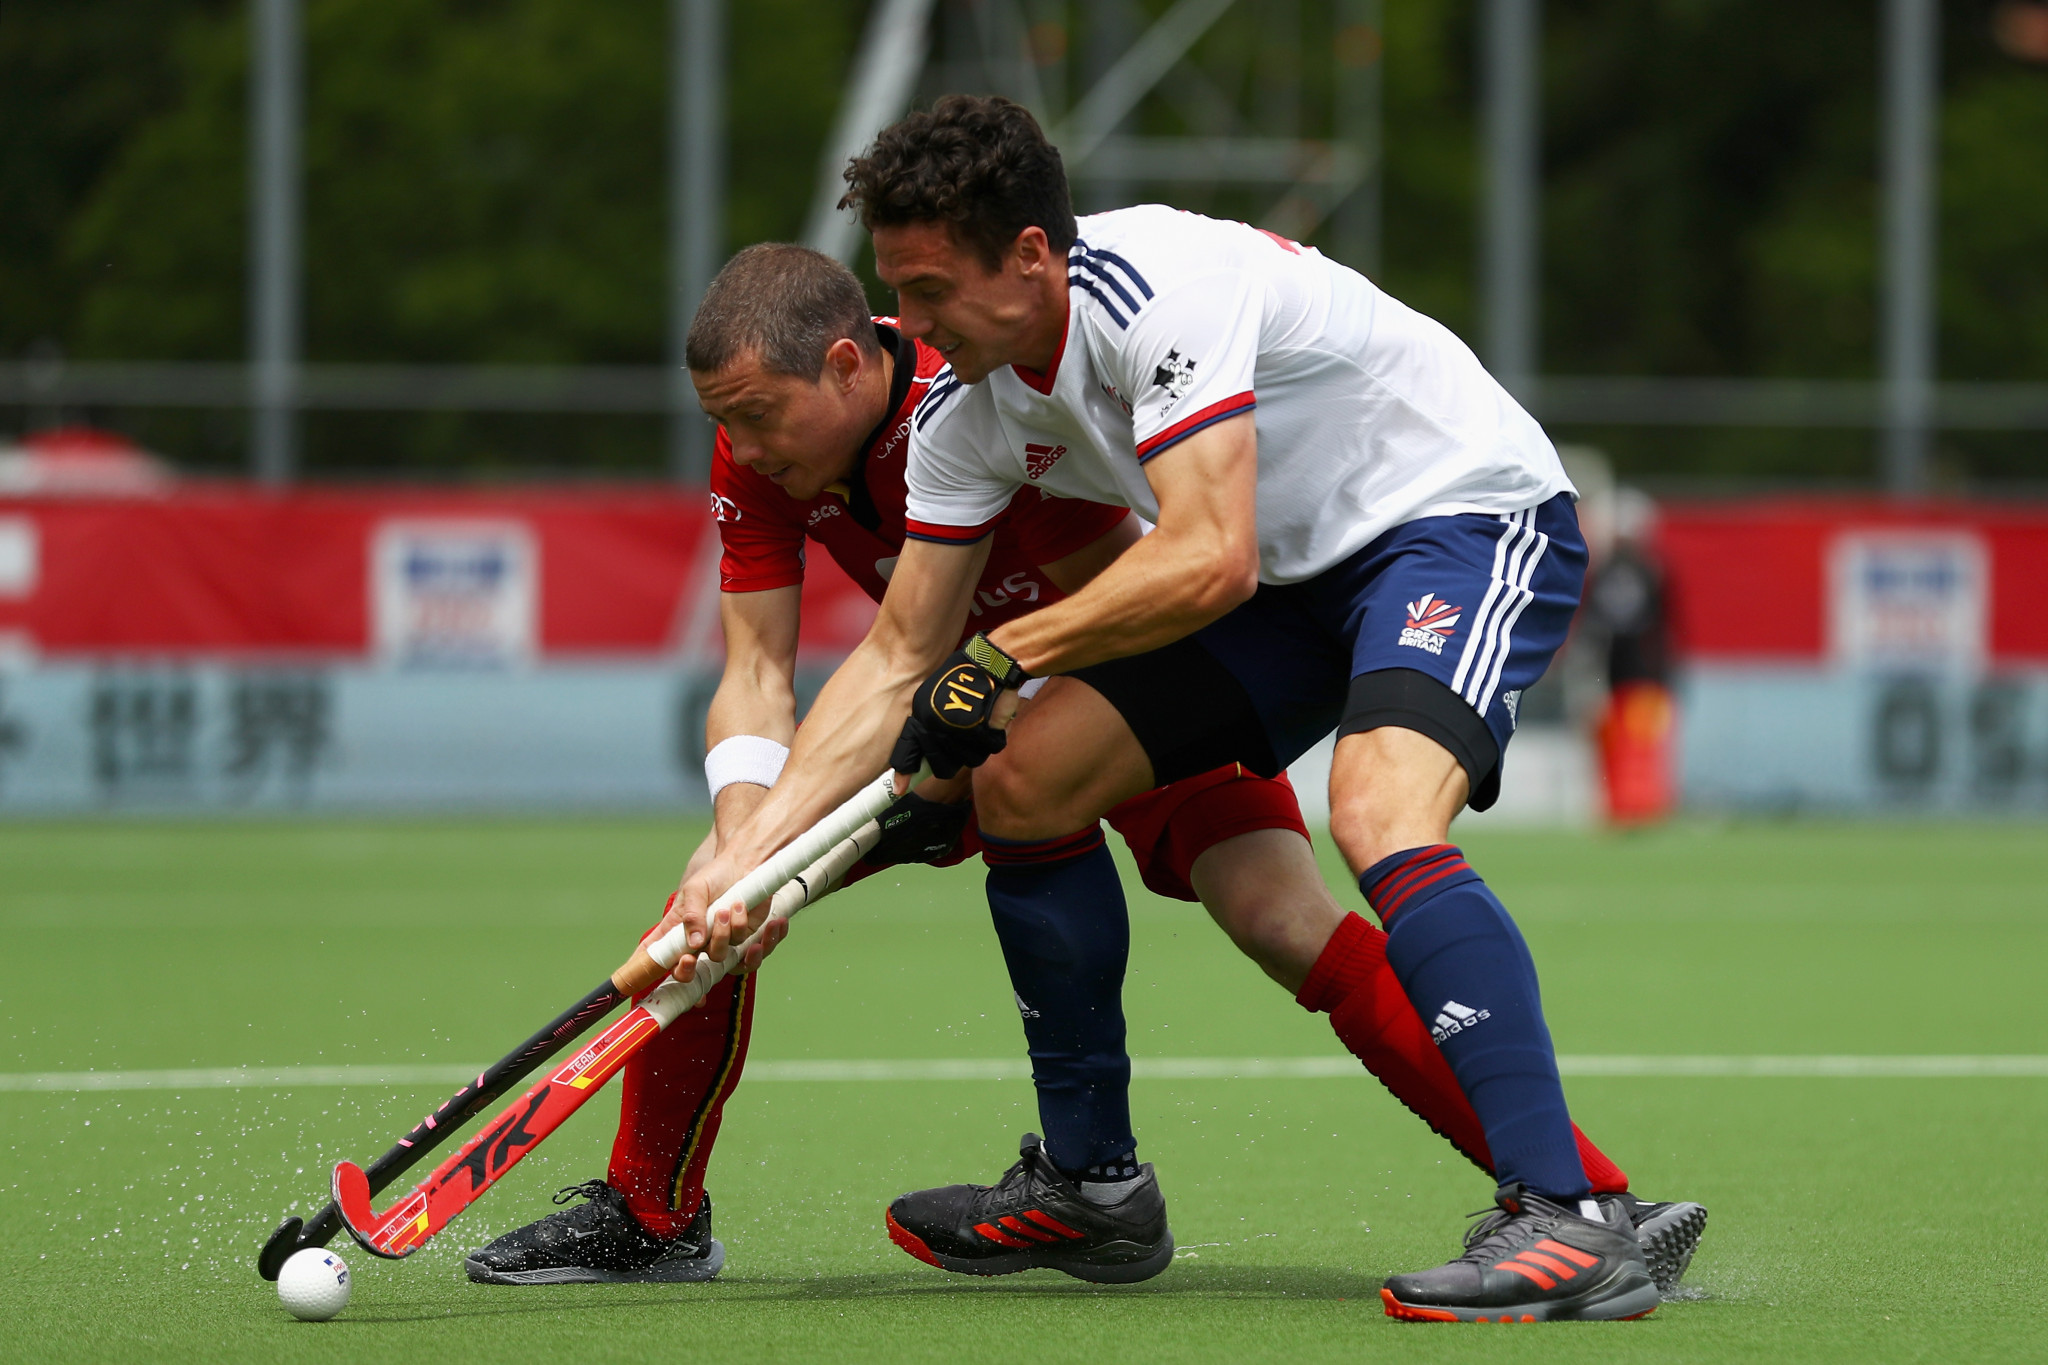 World Cup winners Belgium defeated Britain 4-2 in the men's FIH Pro League in Antwerp ©Getty Images